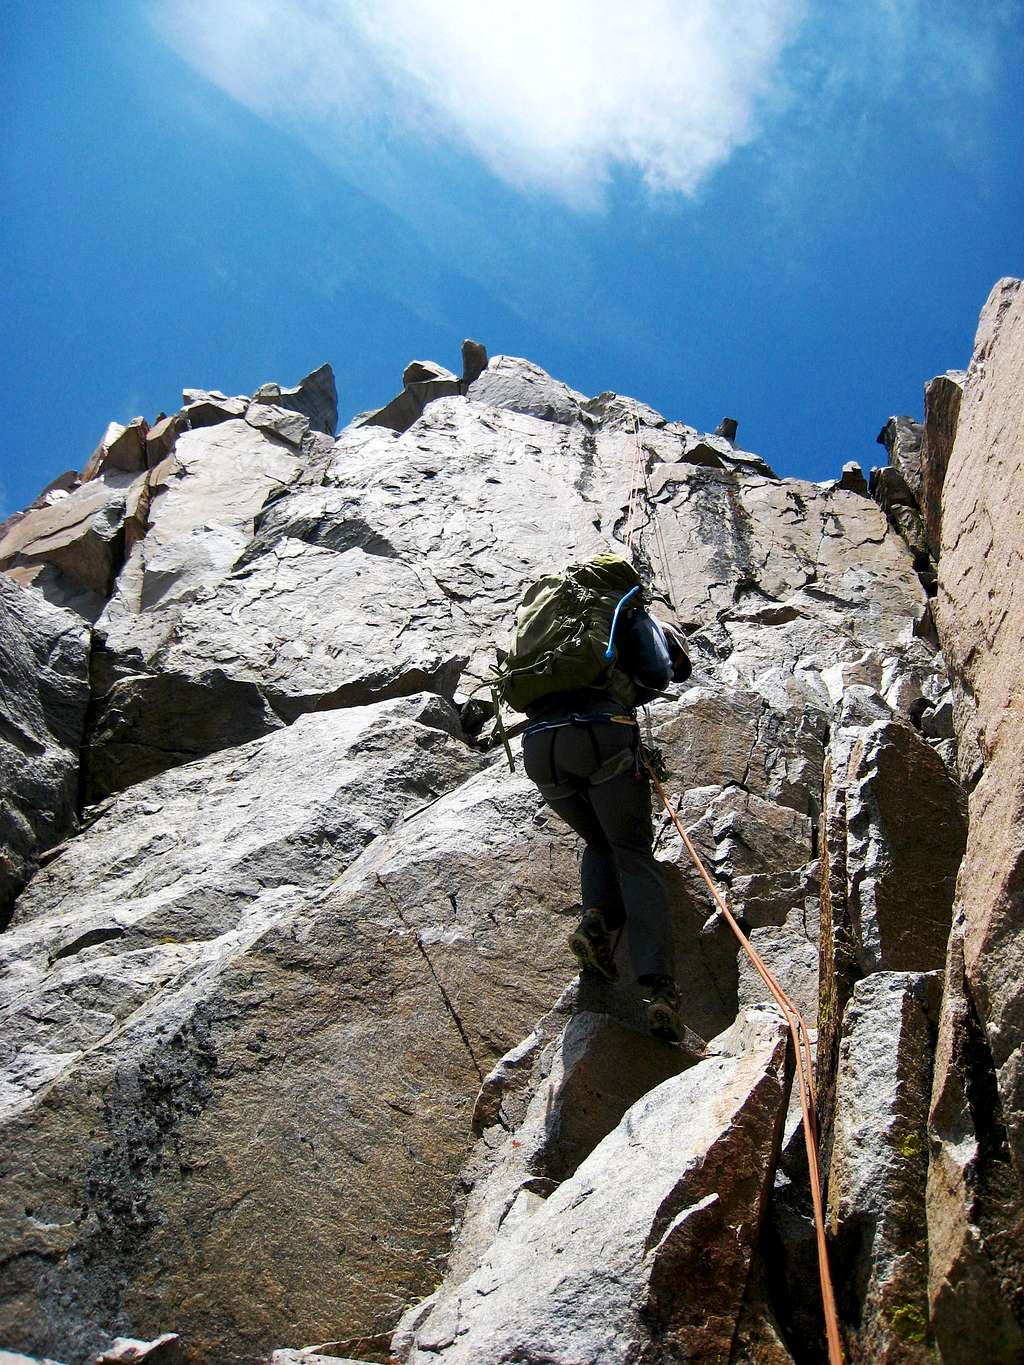 Rappelling into the notch